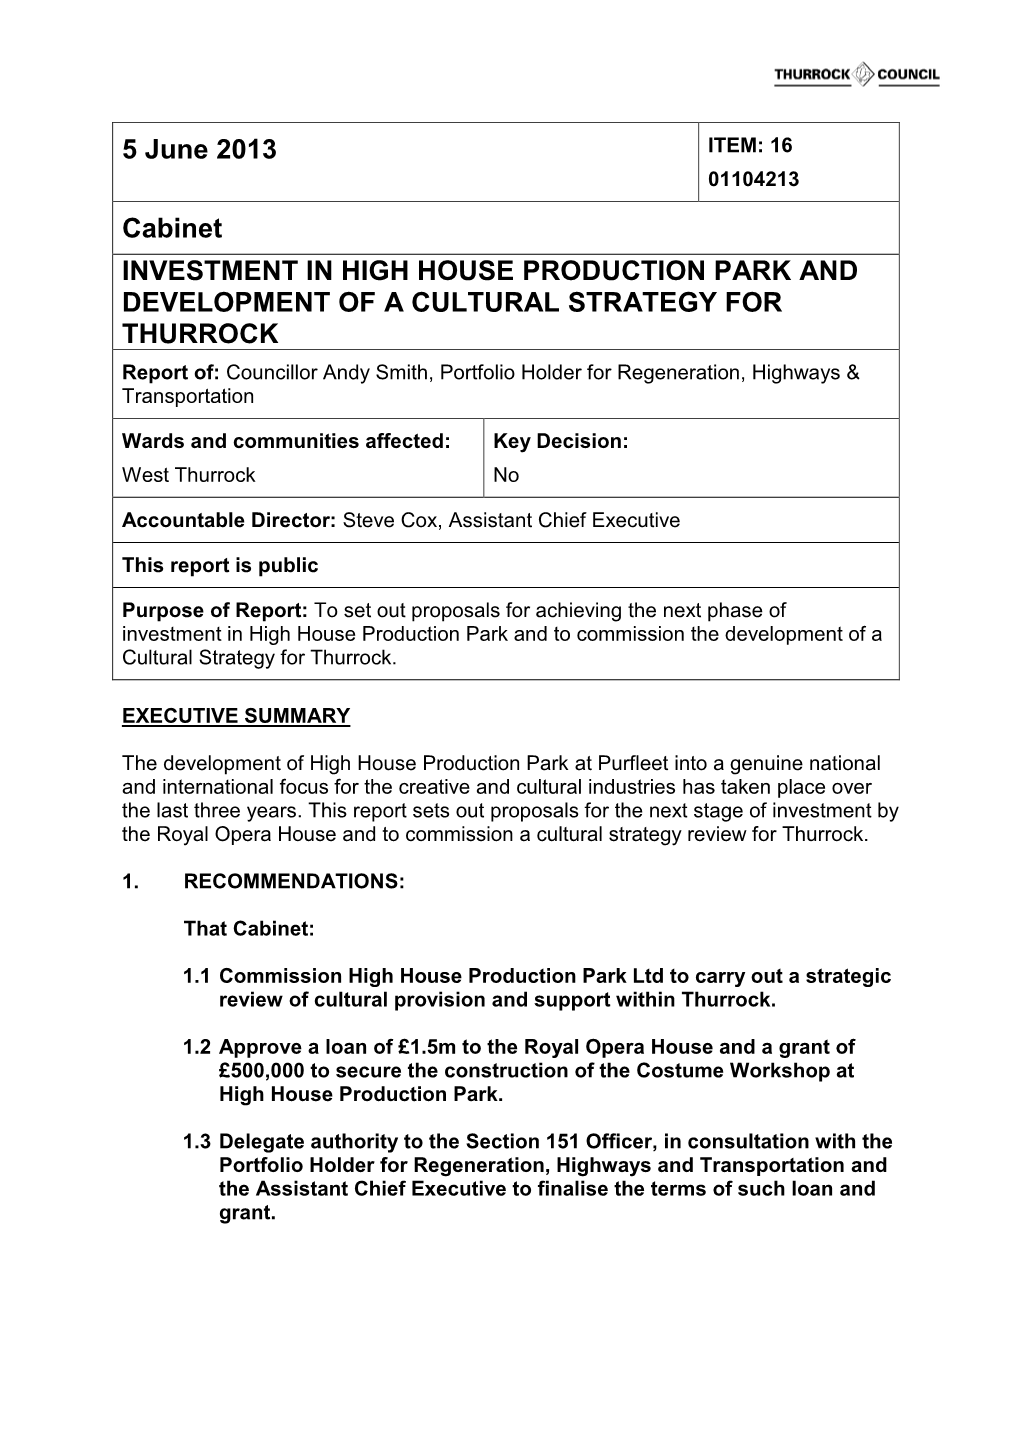 5 June 2013 Cabinet INVESTMENT in HIGH HOUSE PRODUCTION